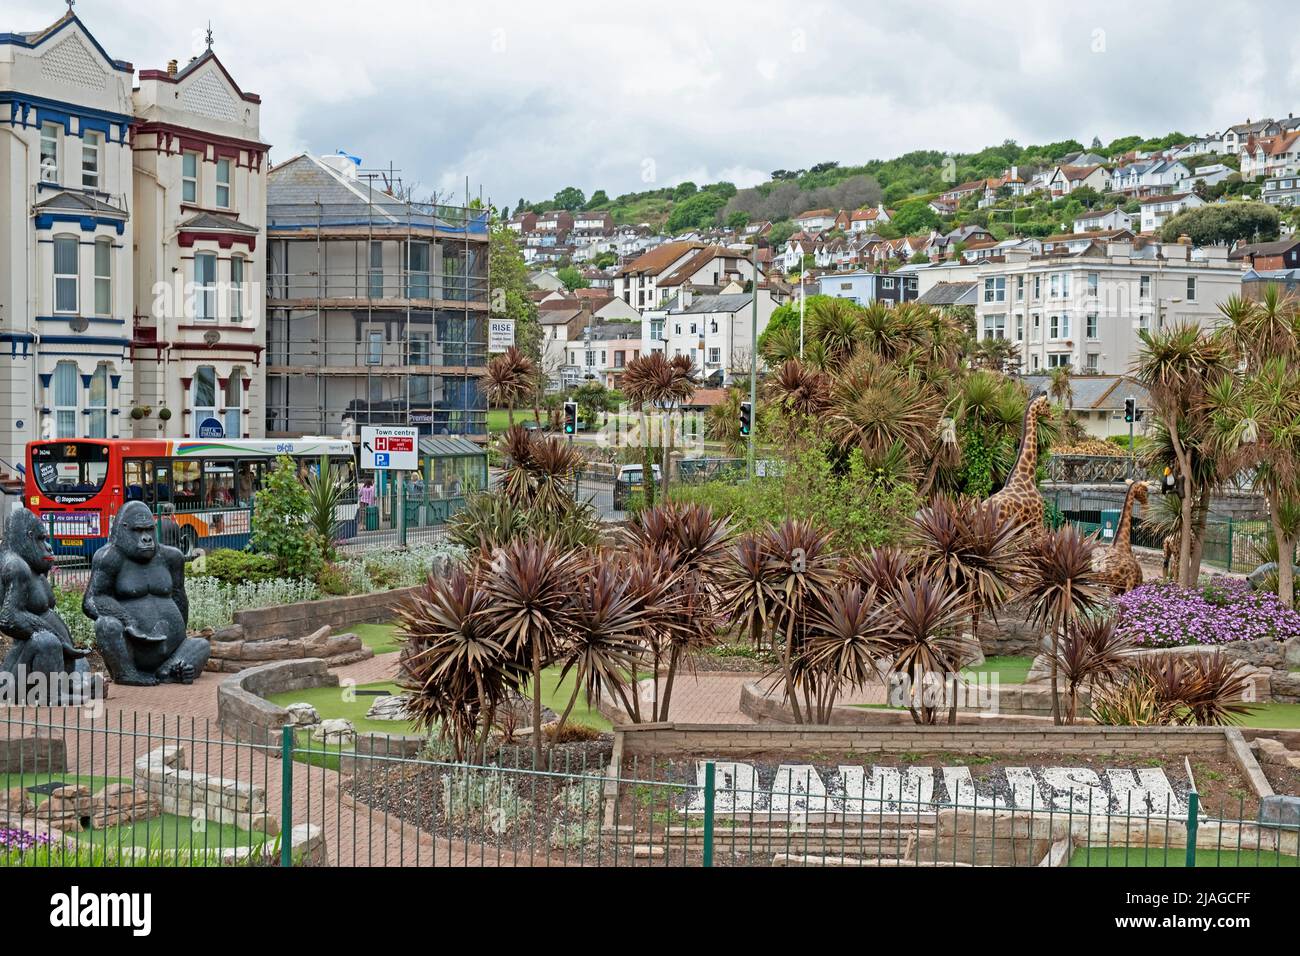 Dawlish, England - May 12, 2022: The central part of the South Devon seaside resort around the Dawlish Lawn and Strand area Stock Photo